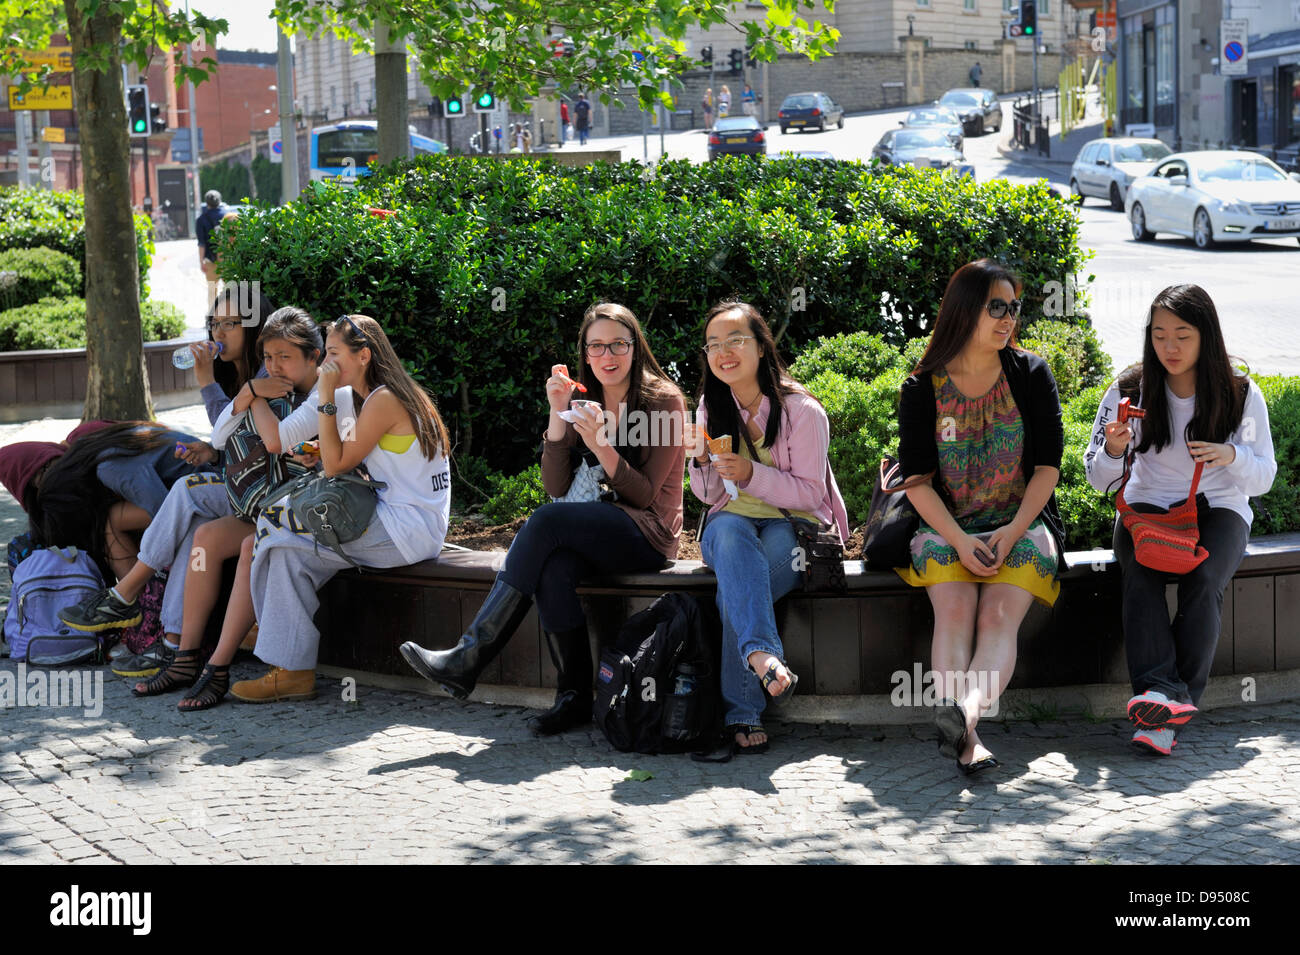 Young women sitting on bench in Bristol city Centre Promenade Stock Photo